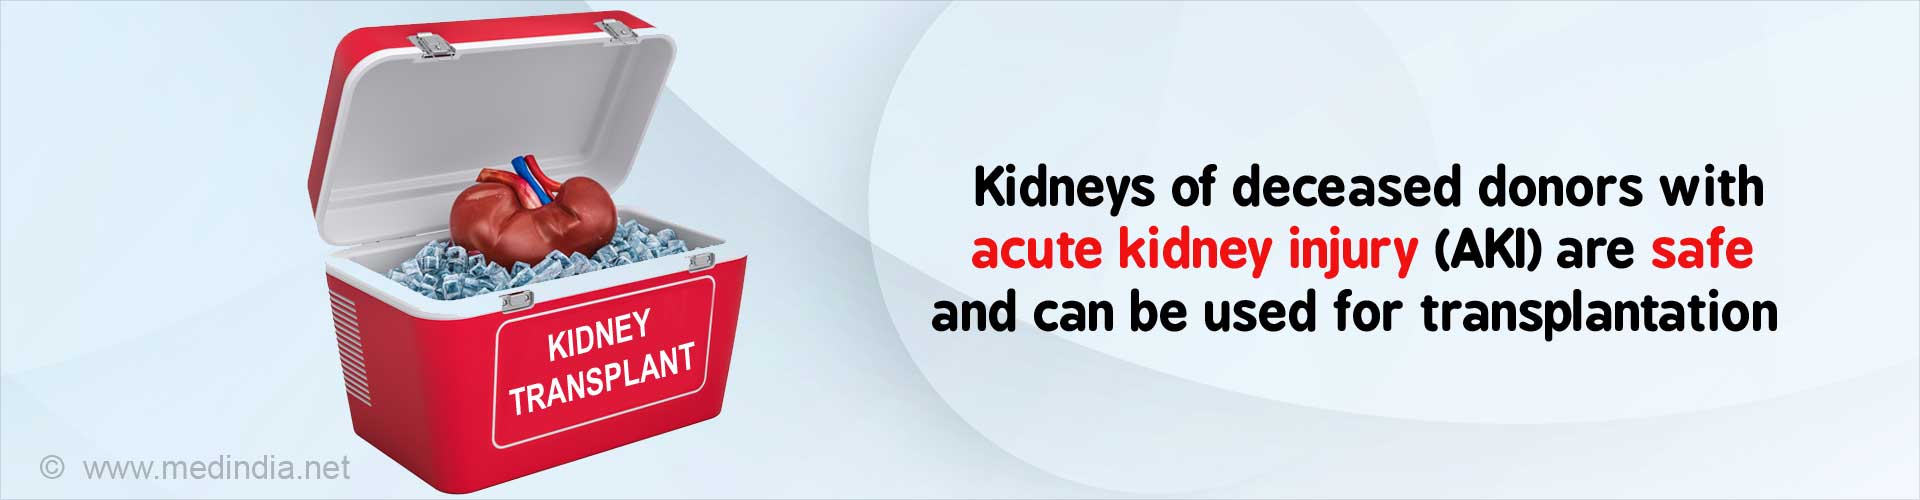 Kidneys of deceased donors with acute kidney injury (AKI) are safe and can be used for transplantation.